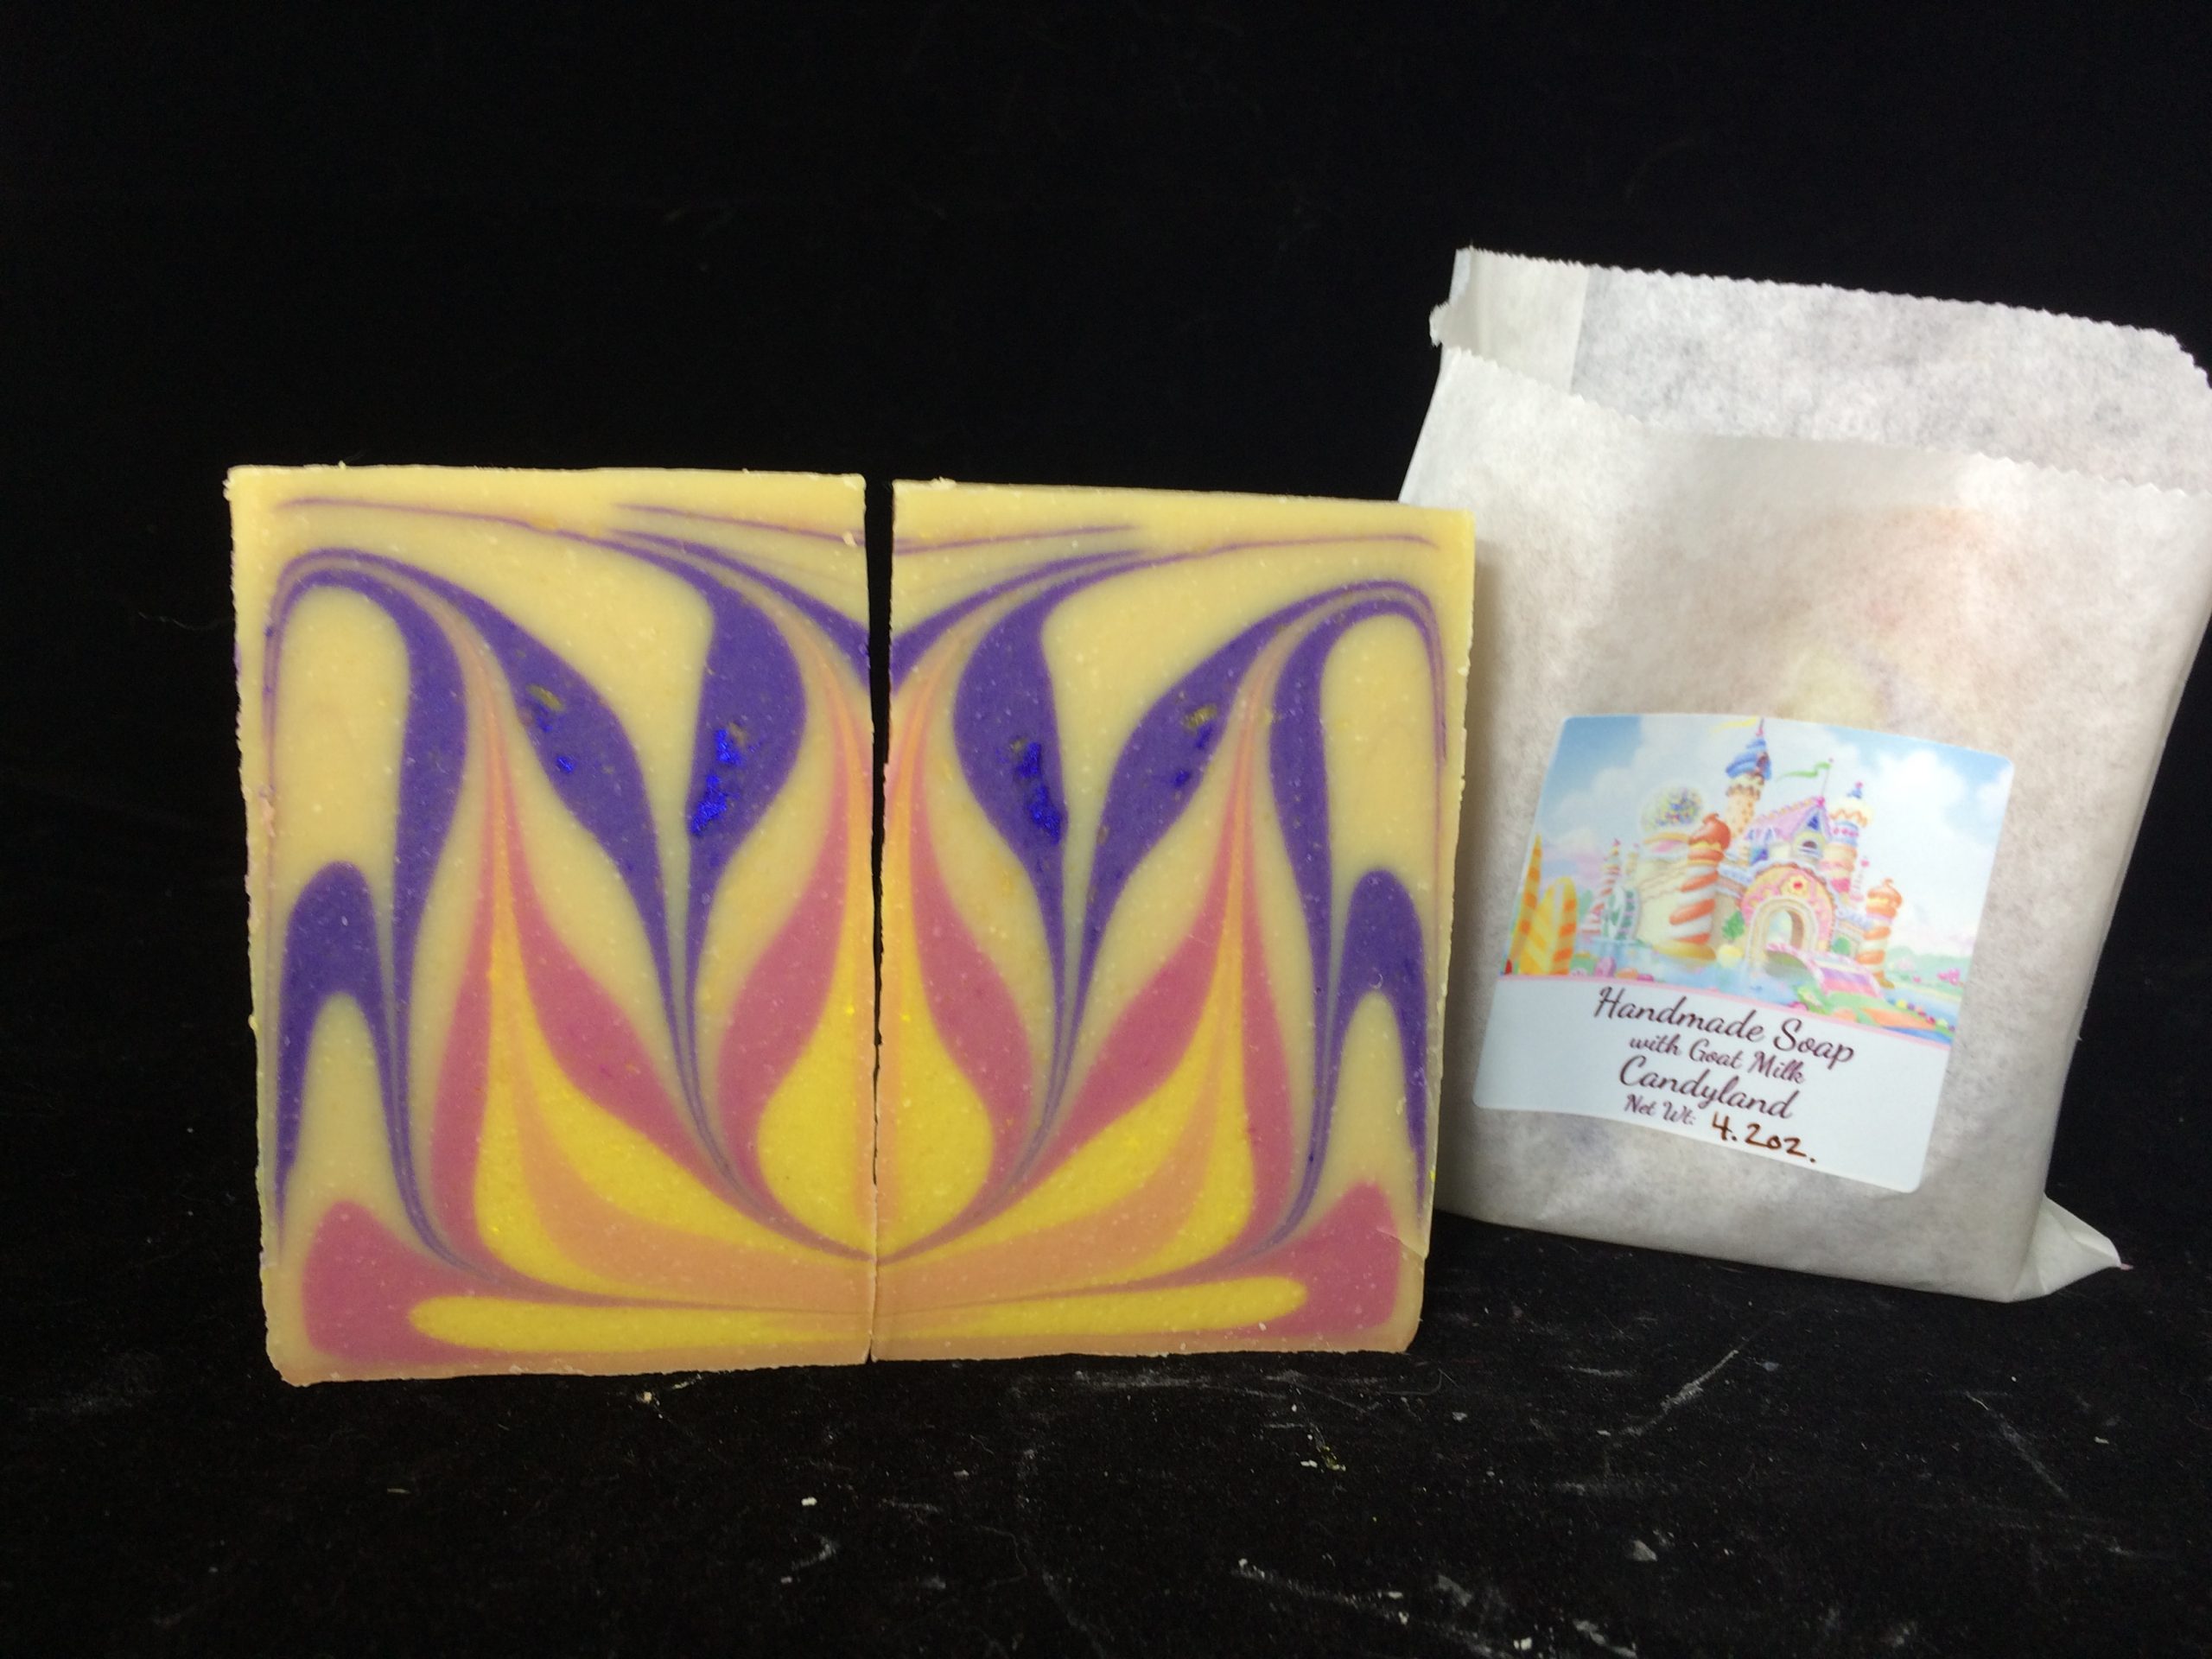 Handmade soap with goat milk in candy land scent